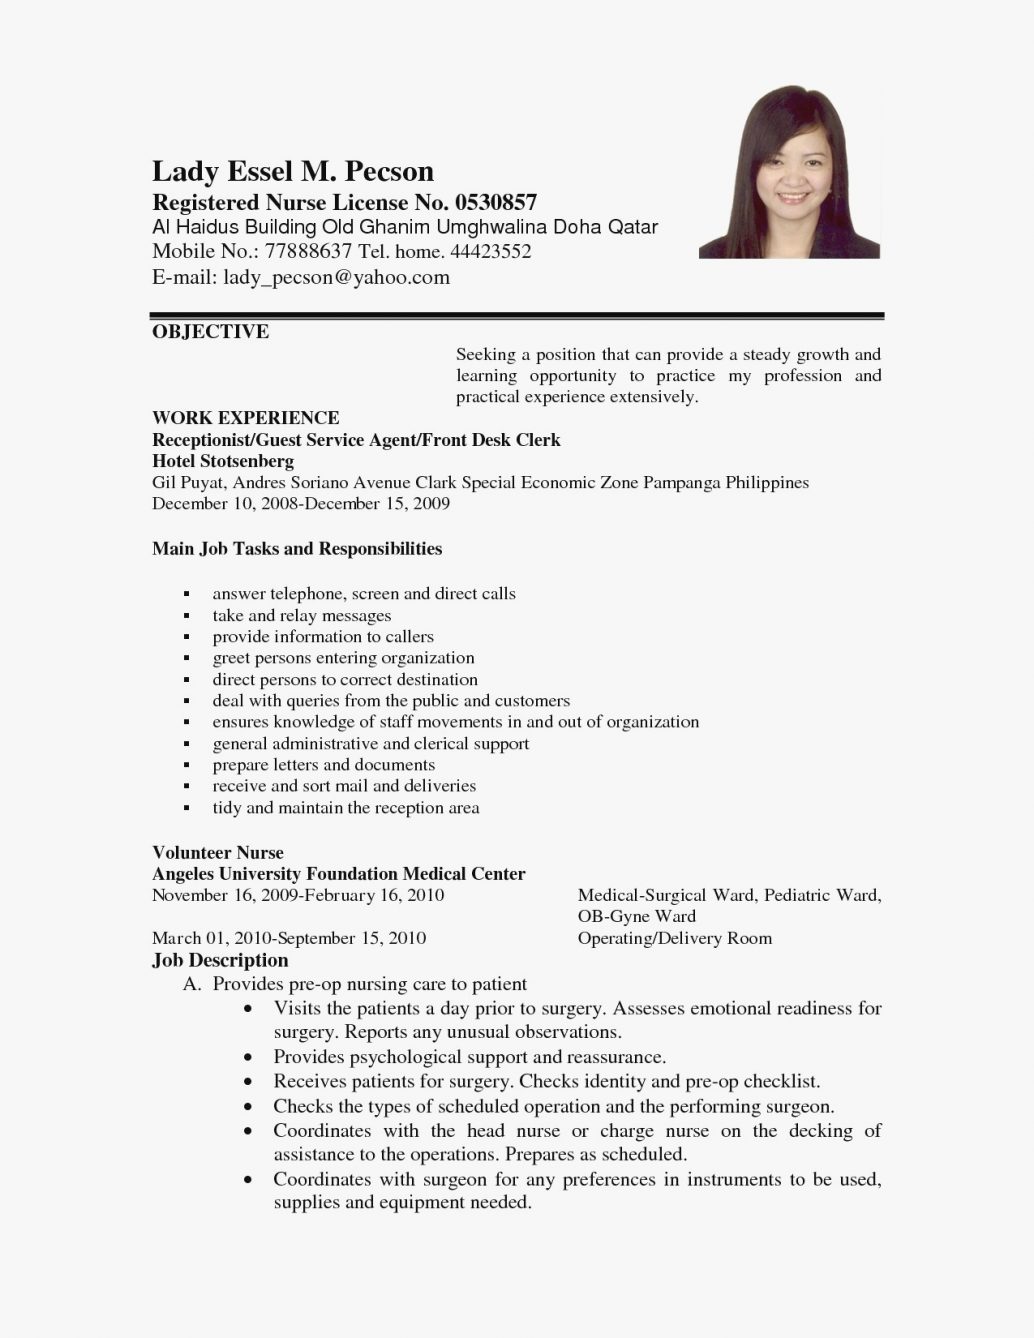 Good Objective For Resume Job Objective In Resumes Simple For Resume Fresh Good Objectives New Post Administrative Assistant Effective Objecti Customer Service Career Call Center General Phlebotomist good objective for resume|wikiresume.com